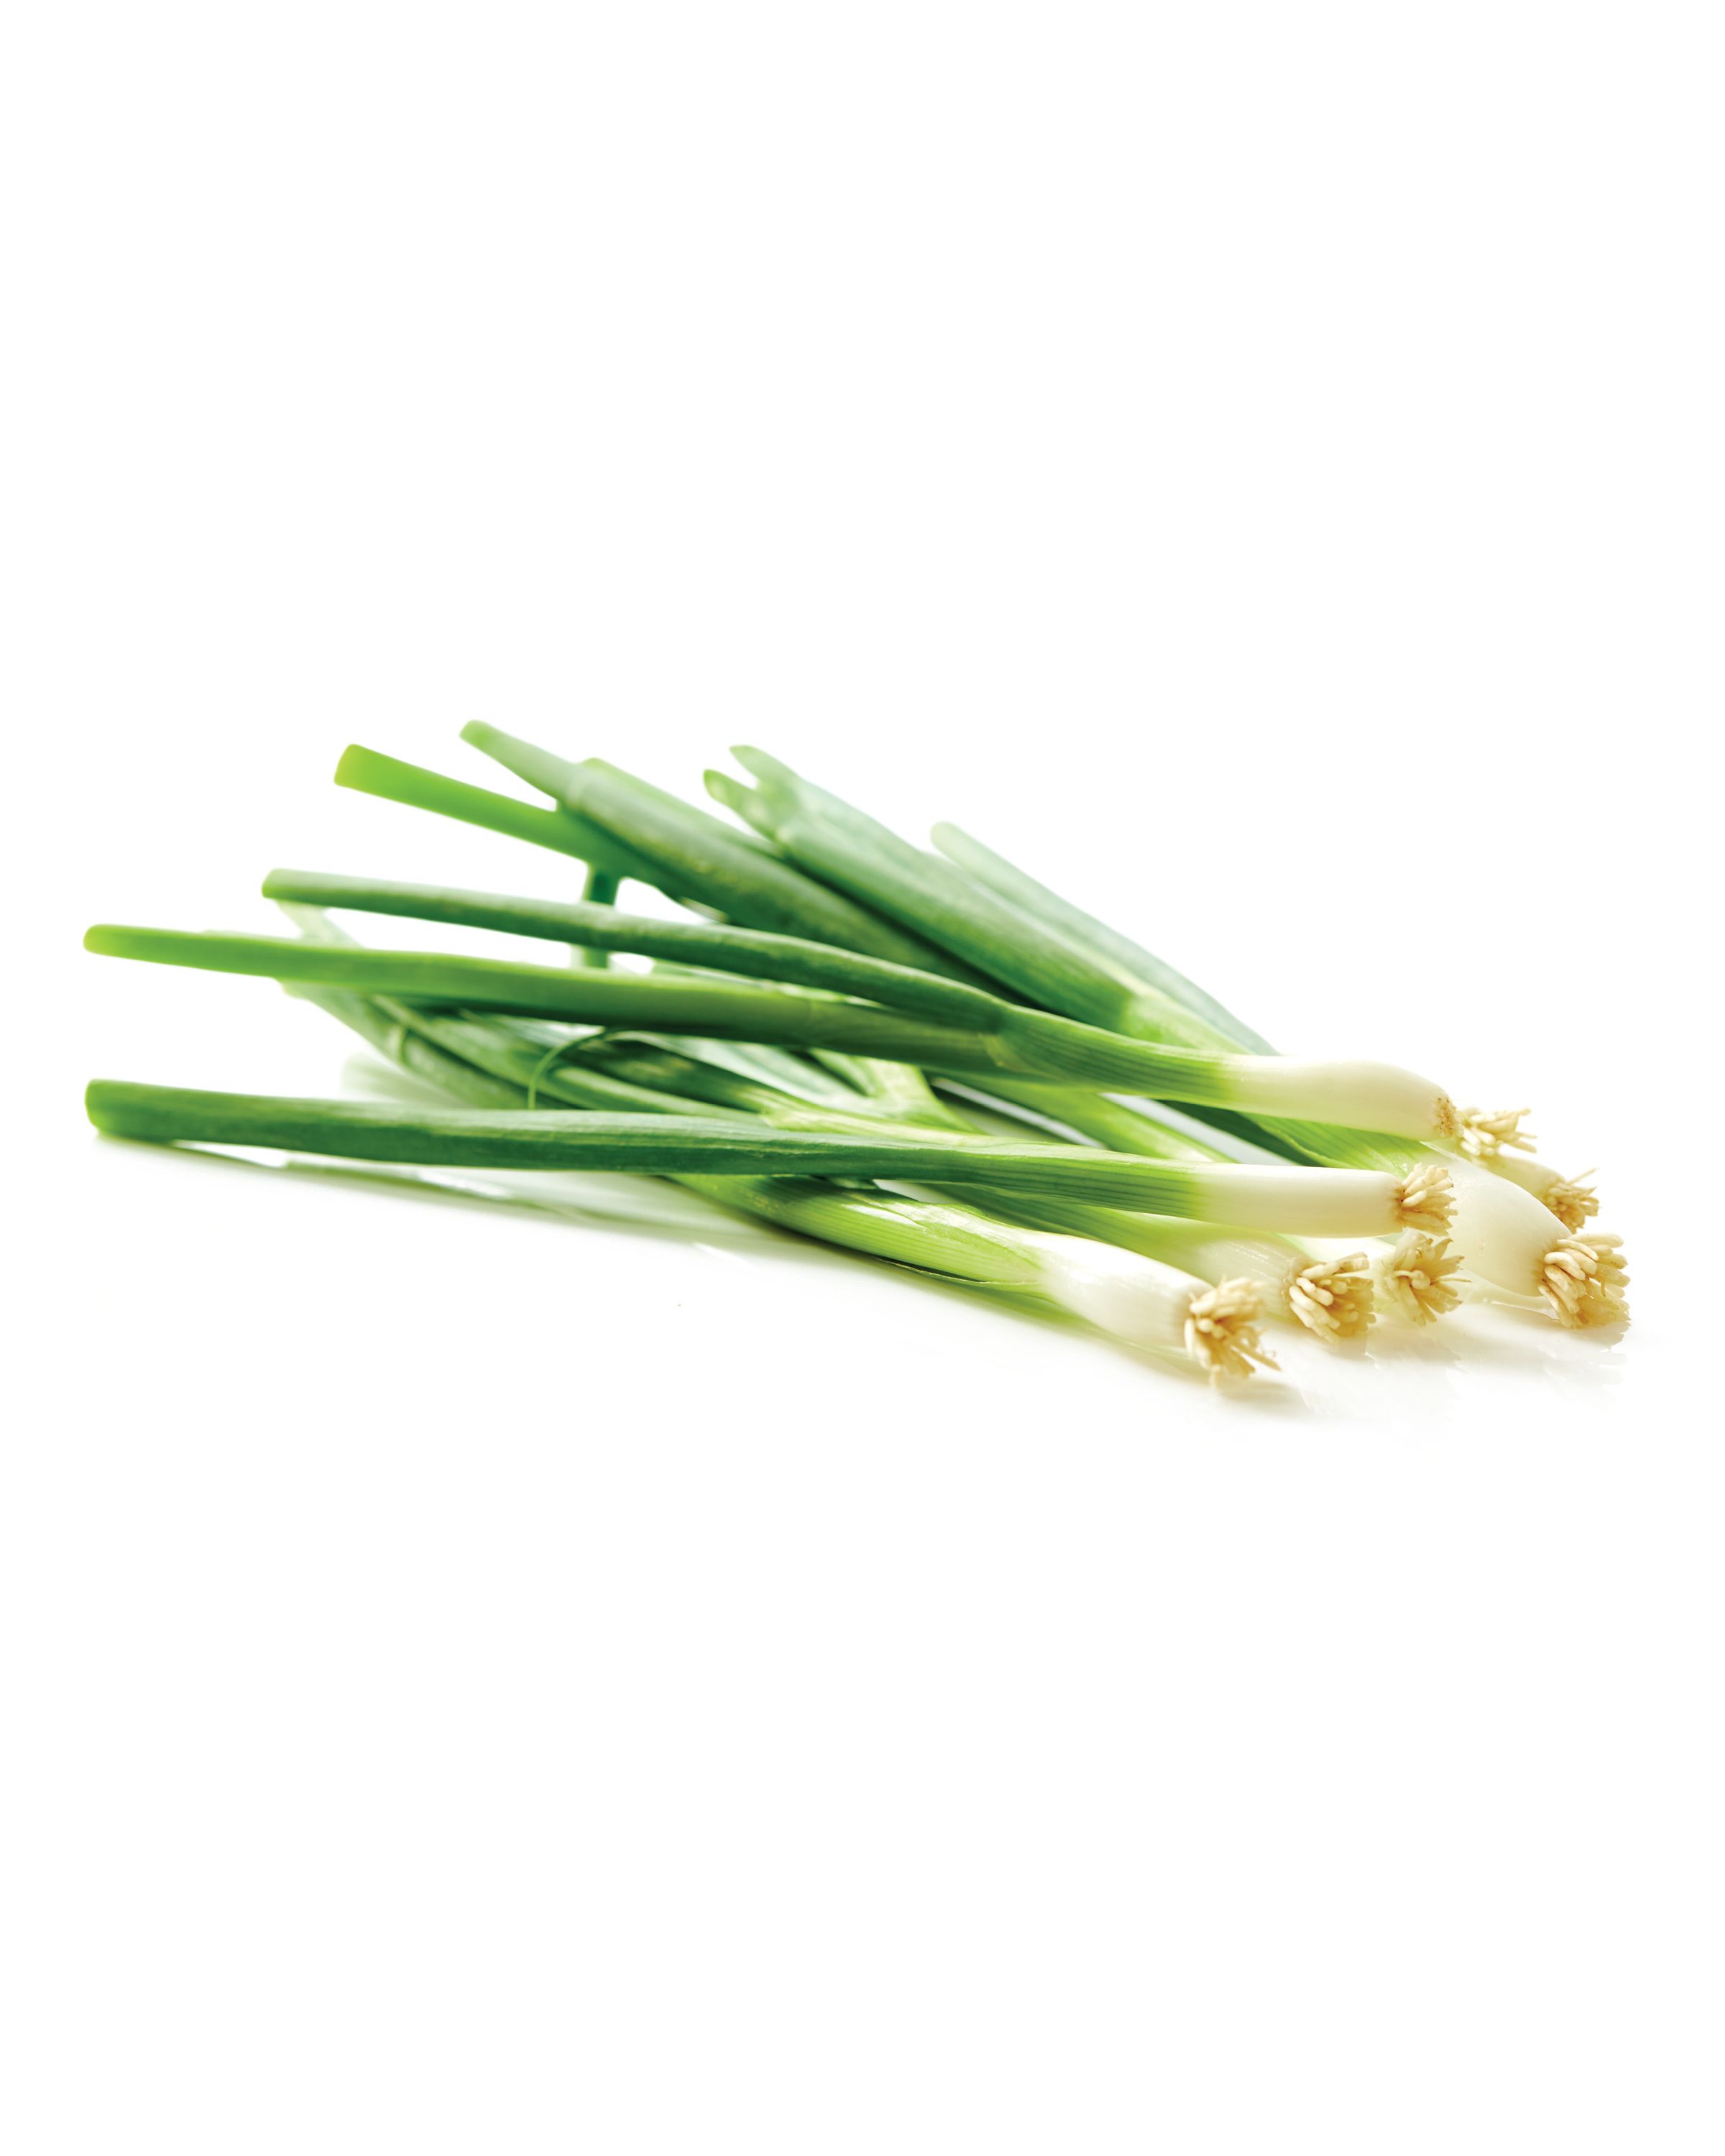 Nature's Pick Spring Onions Each